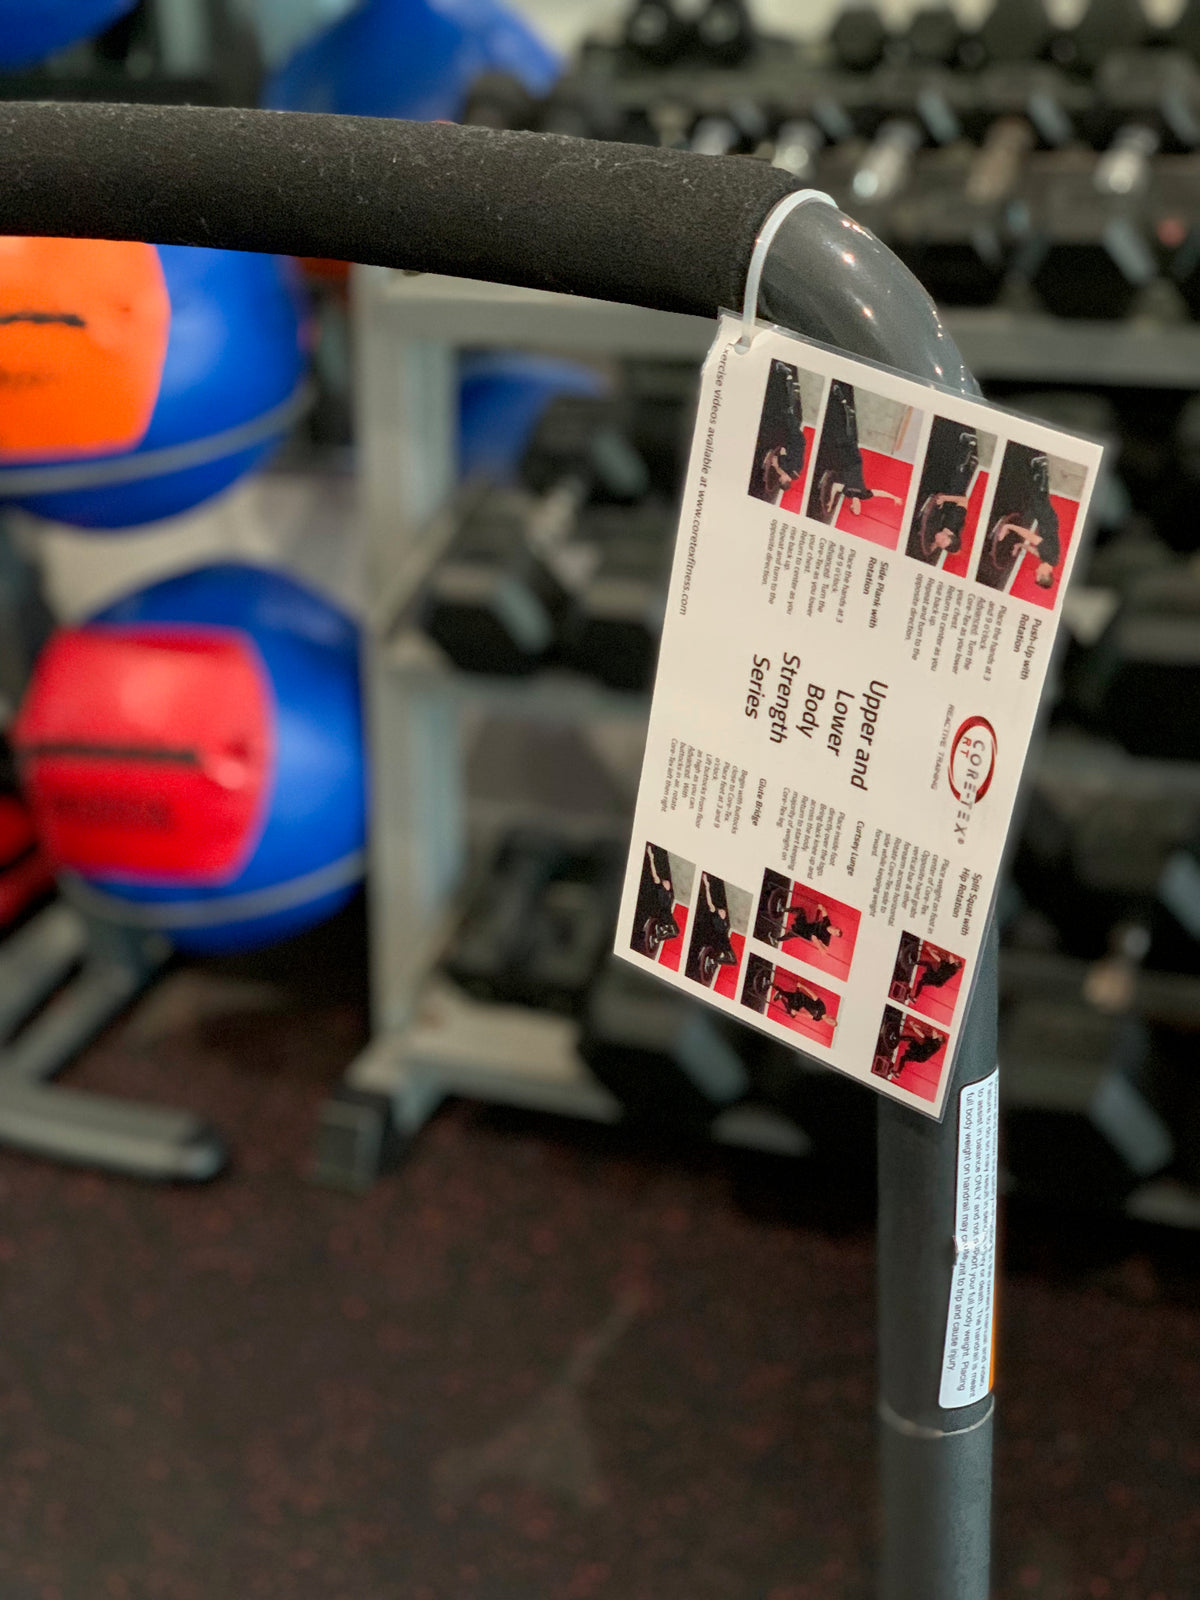 Core-Tex upper and lower body strength series card attached to Core-Tex Reactive Trainer handrail  